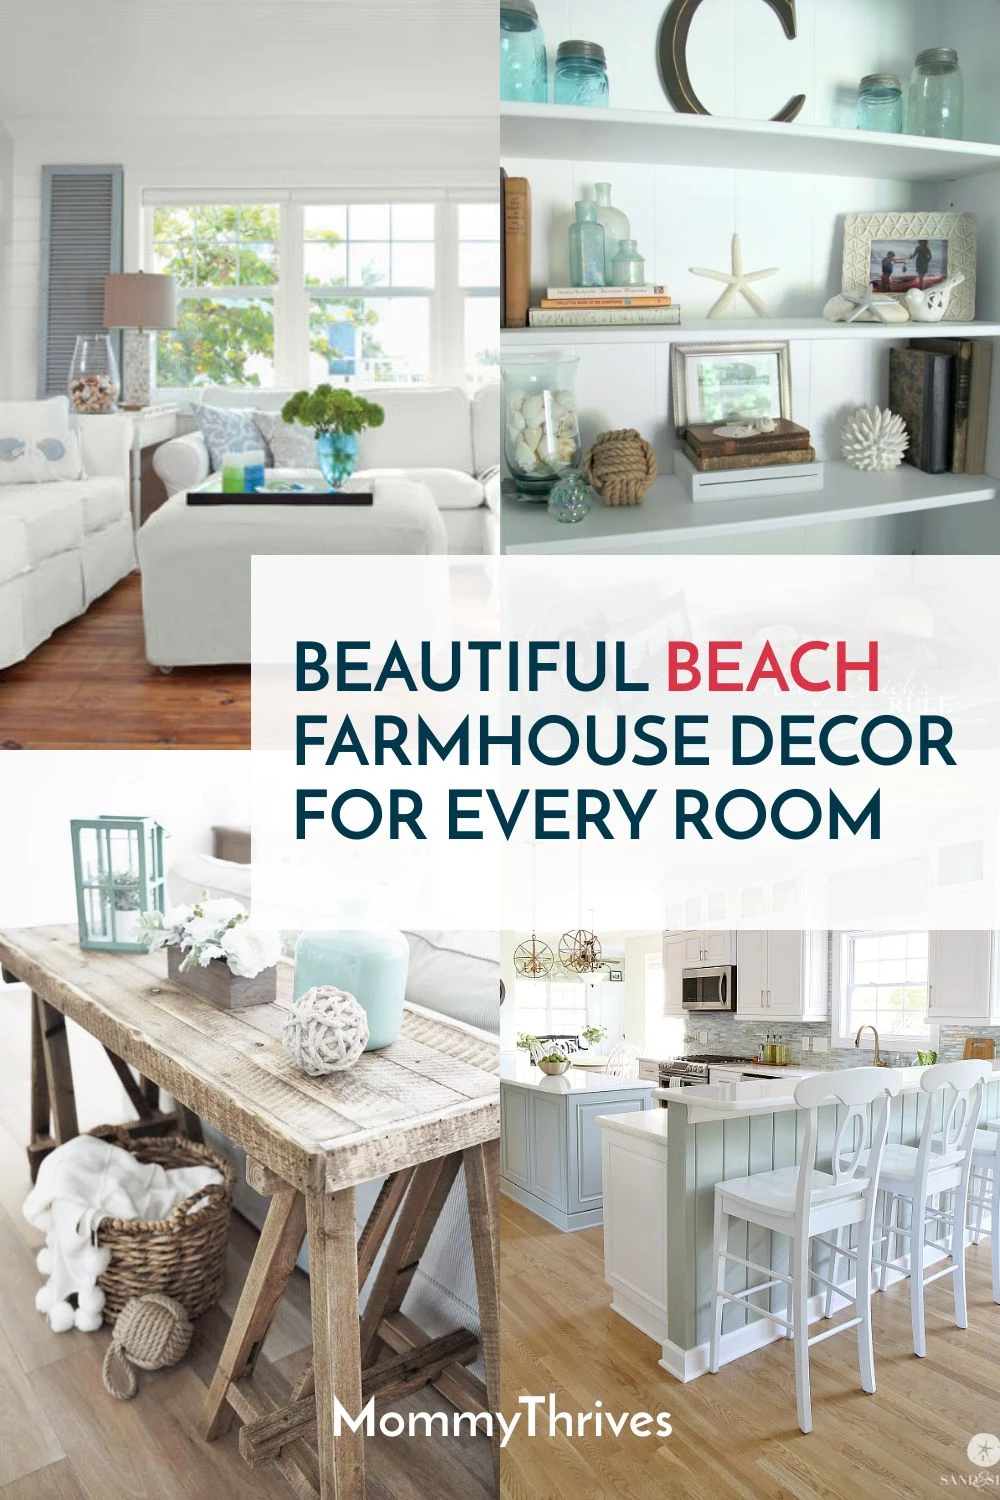 Ideas for Beach House Decor on a Thrift Store Budget